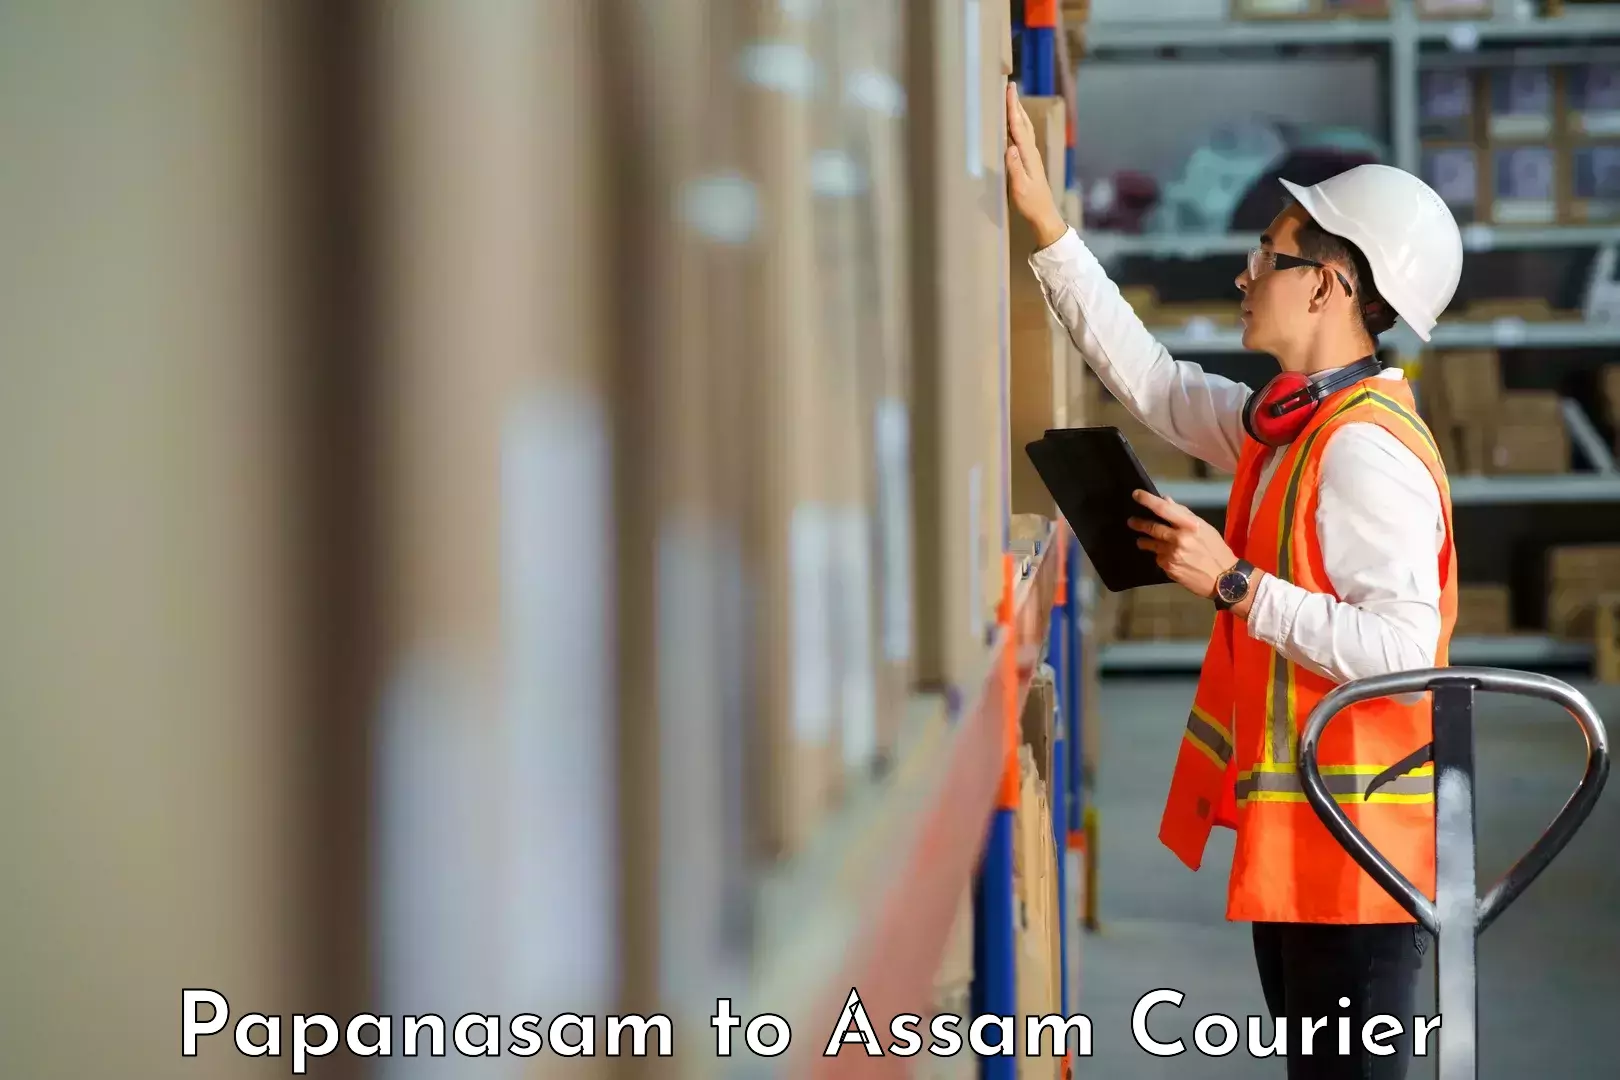 International courier networks Papanasam to Assam